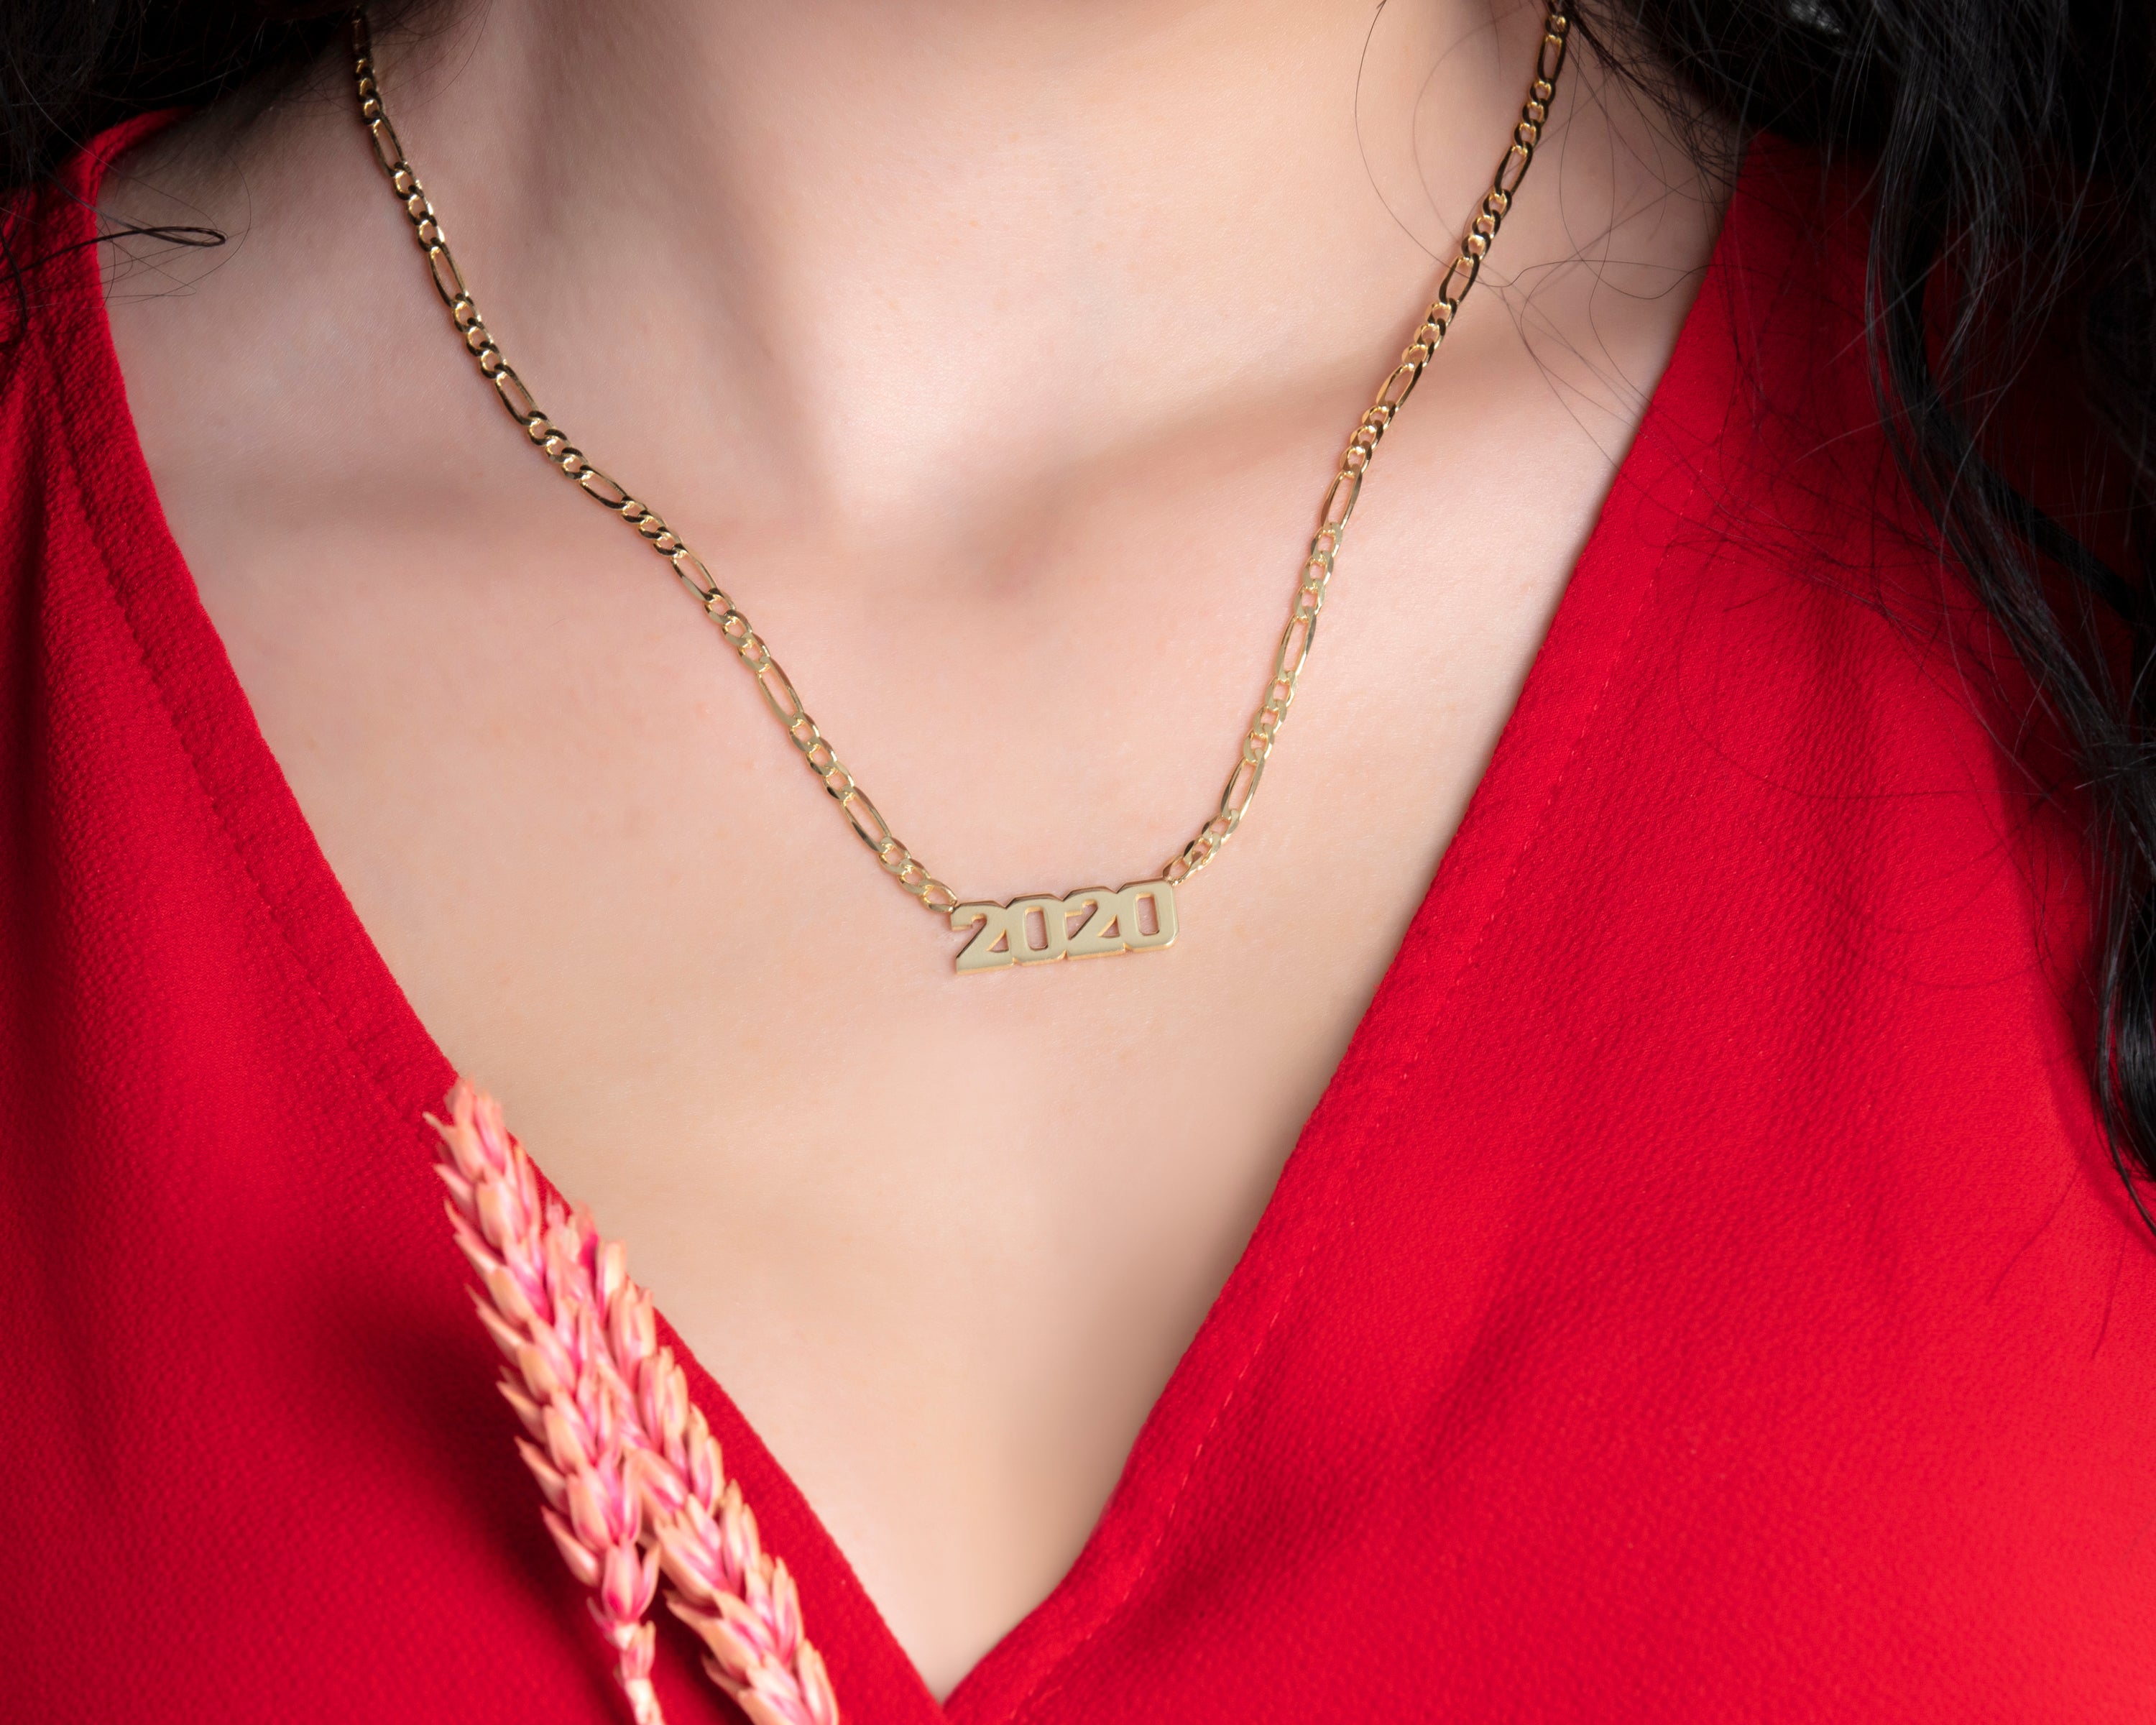 The Scarlet 14K Gold Plated Custom Date Necklace